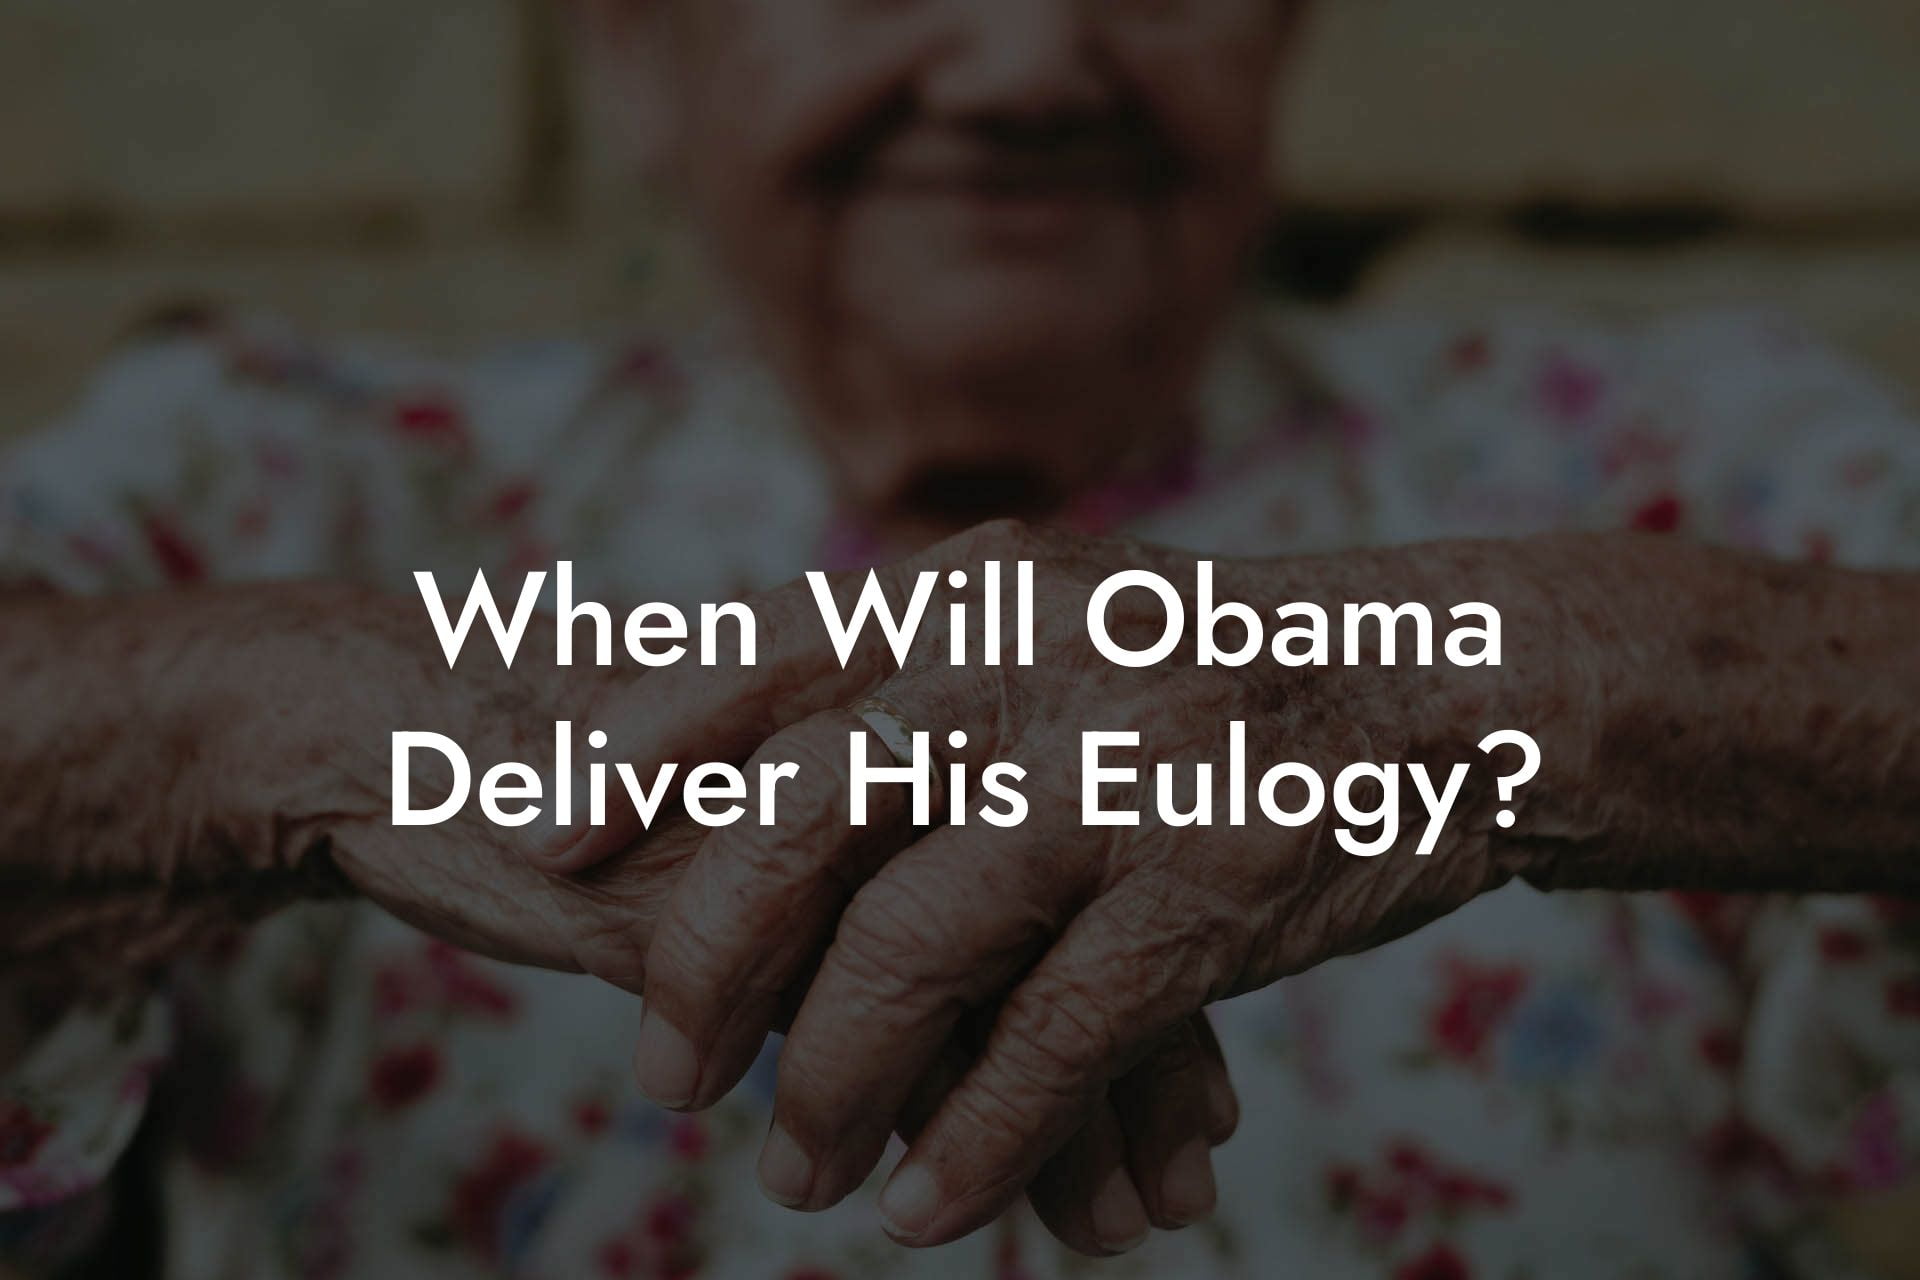 When Will Obama Deliver His Eulogy?